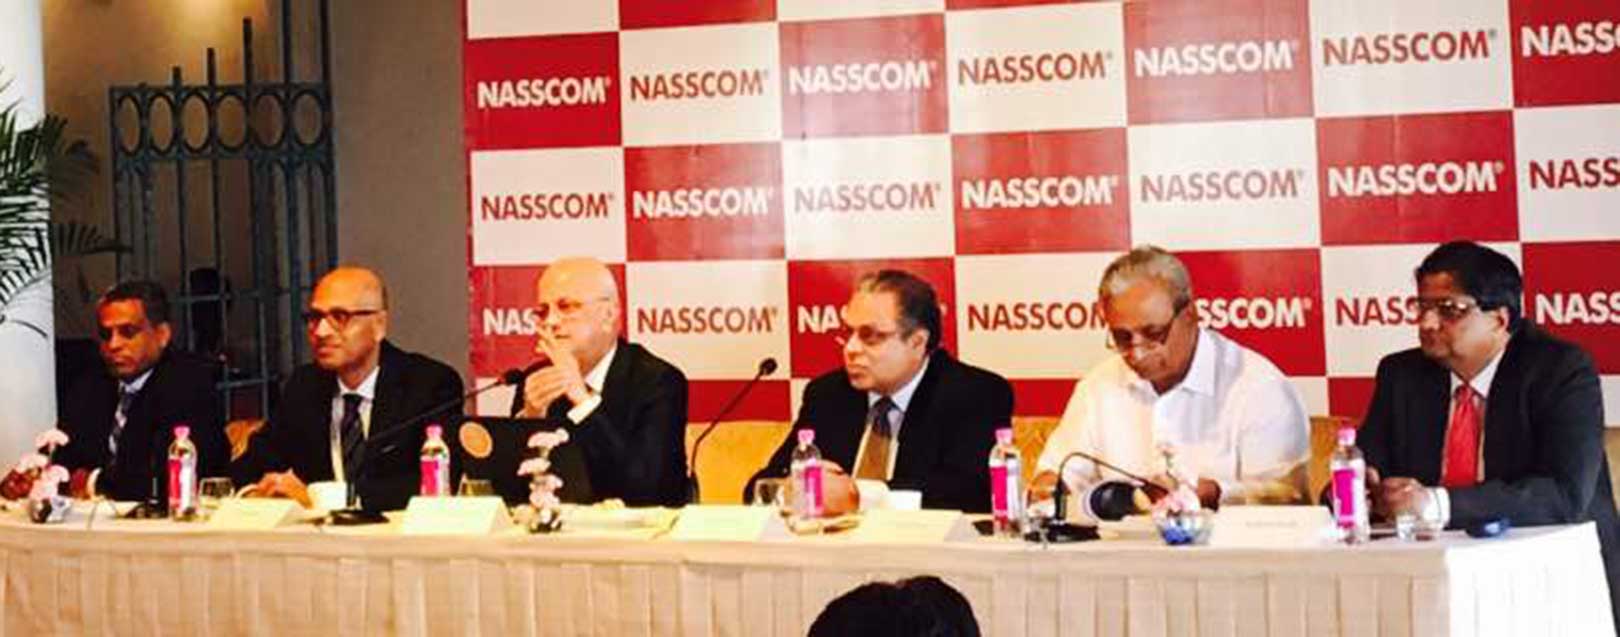 ‘We categorically reject the reports of mass layoffs in the sector’, Chandrasekhar, NASSCOM